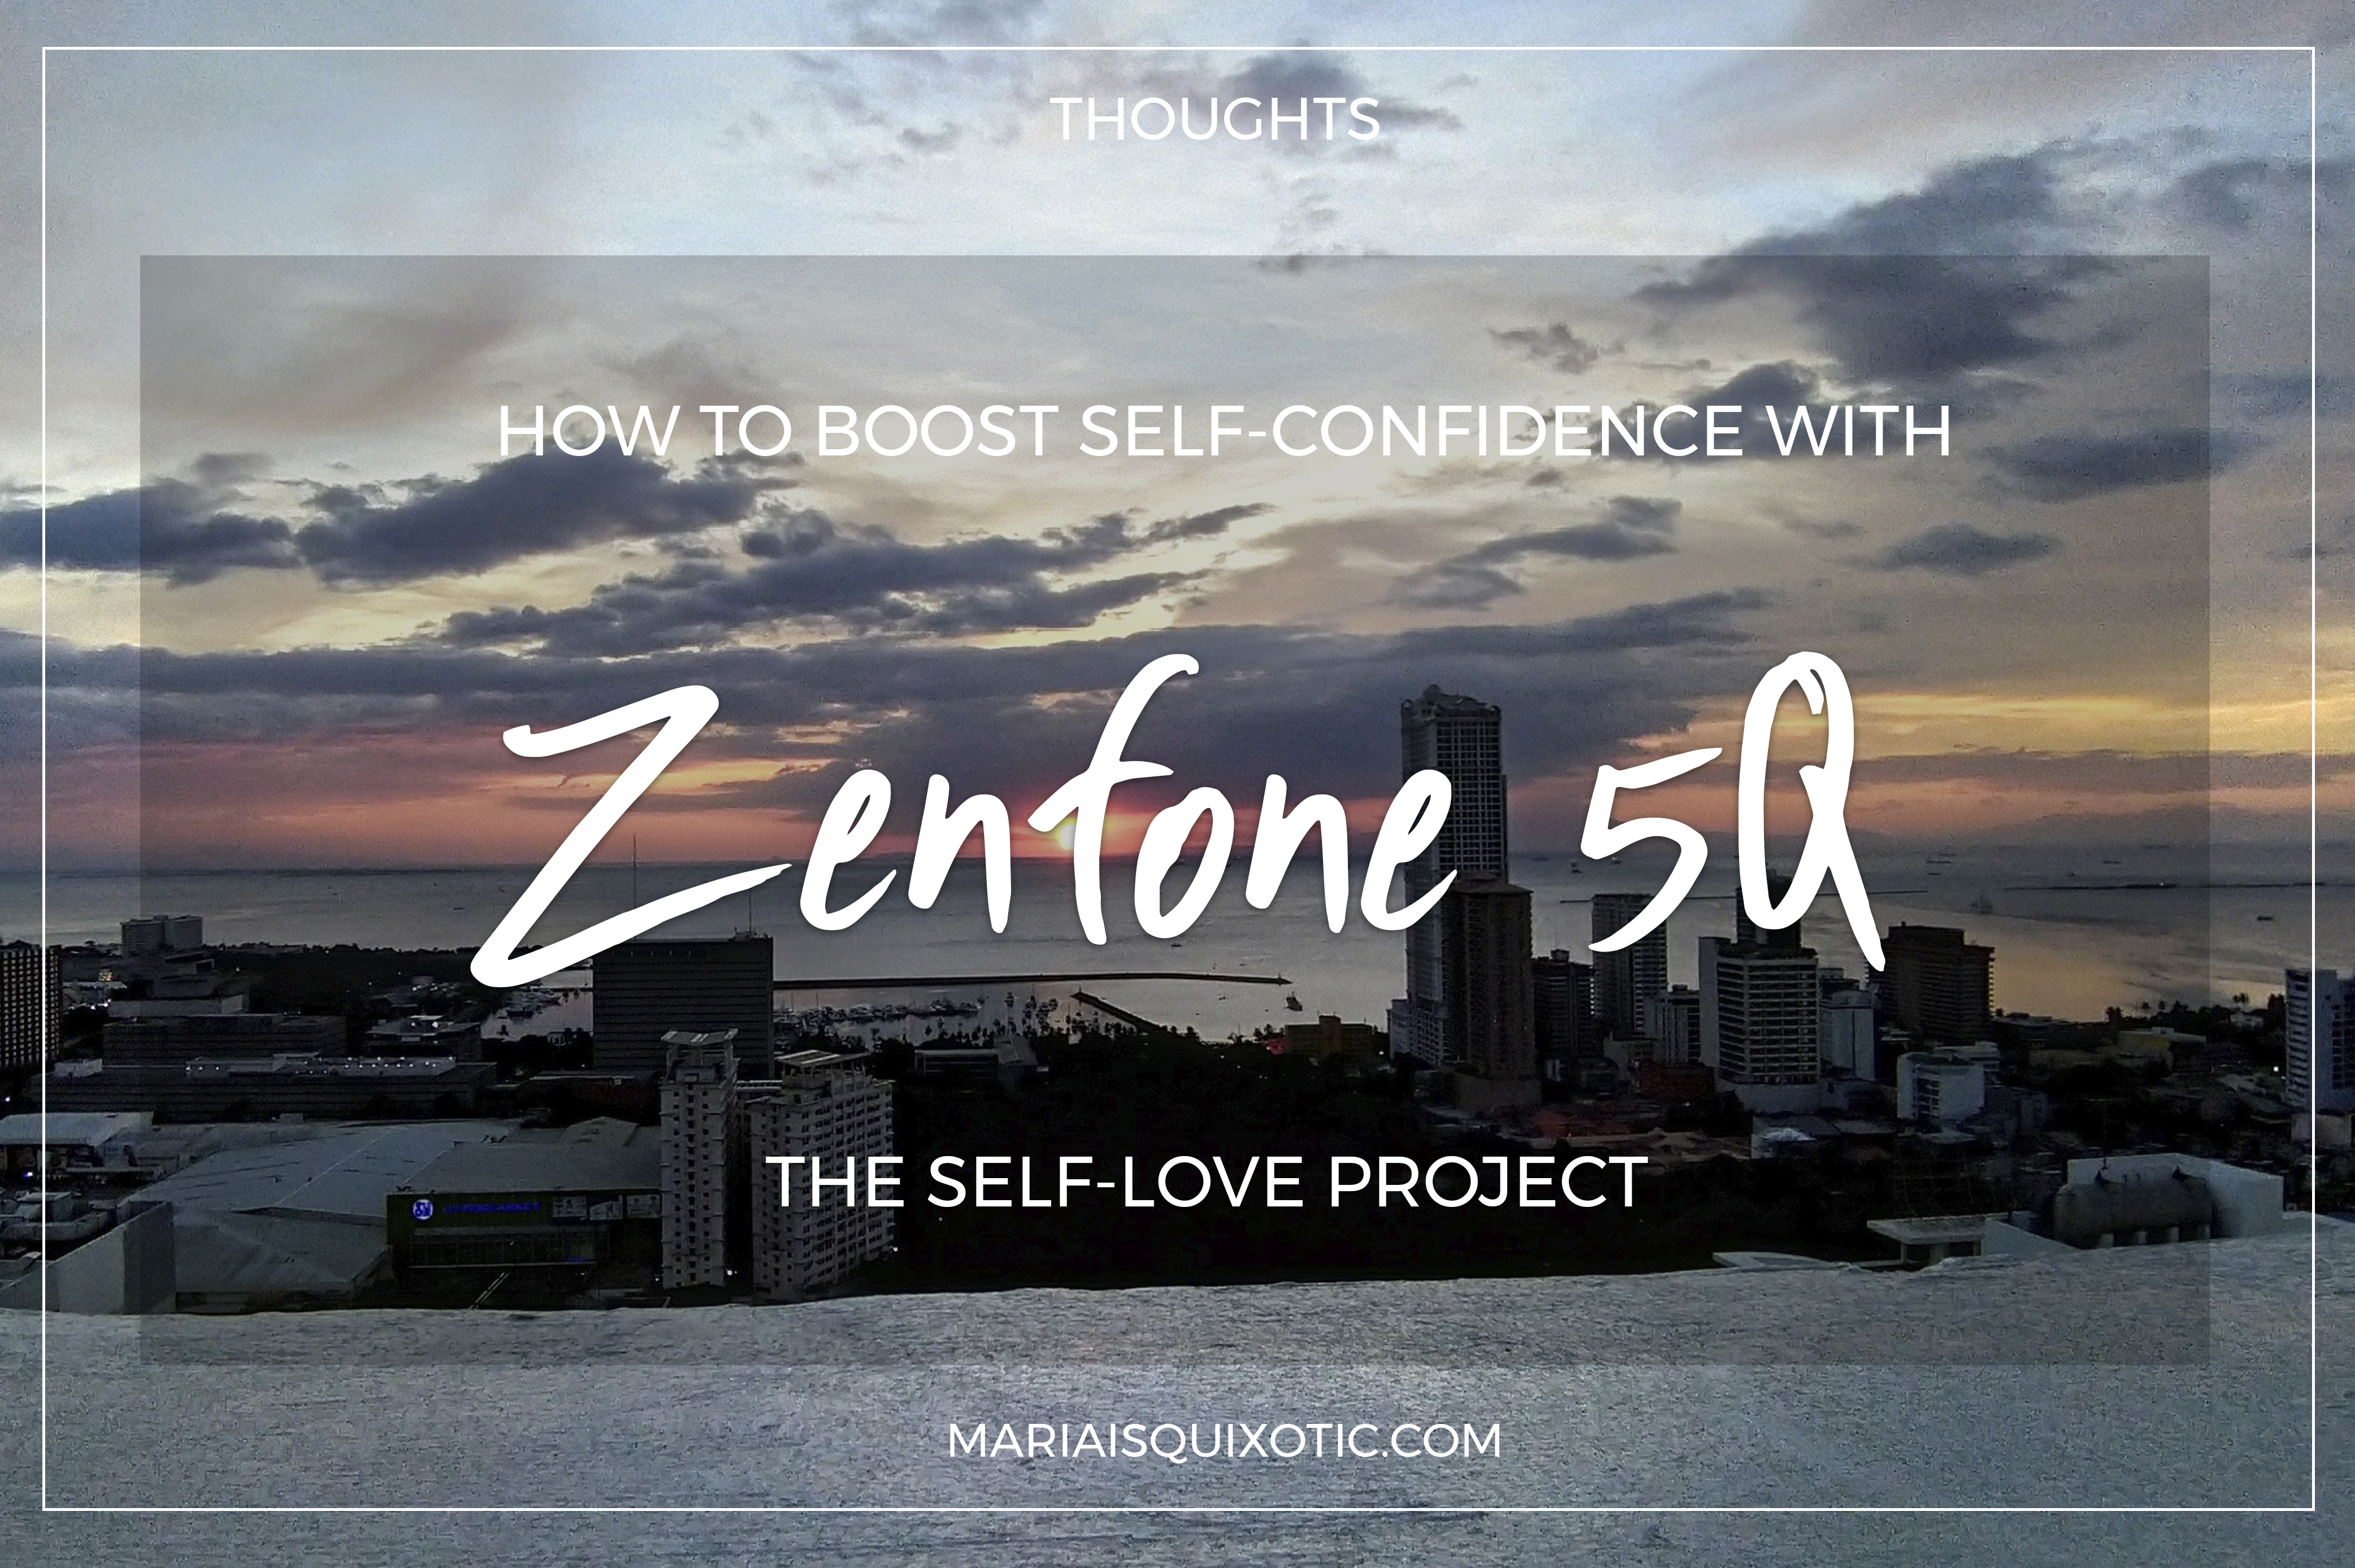 The Self-Love Project with Asus Zenfone 5Q